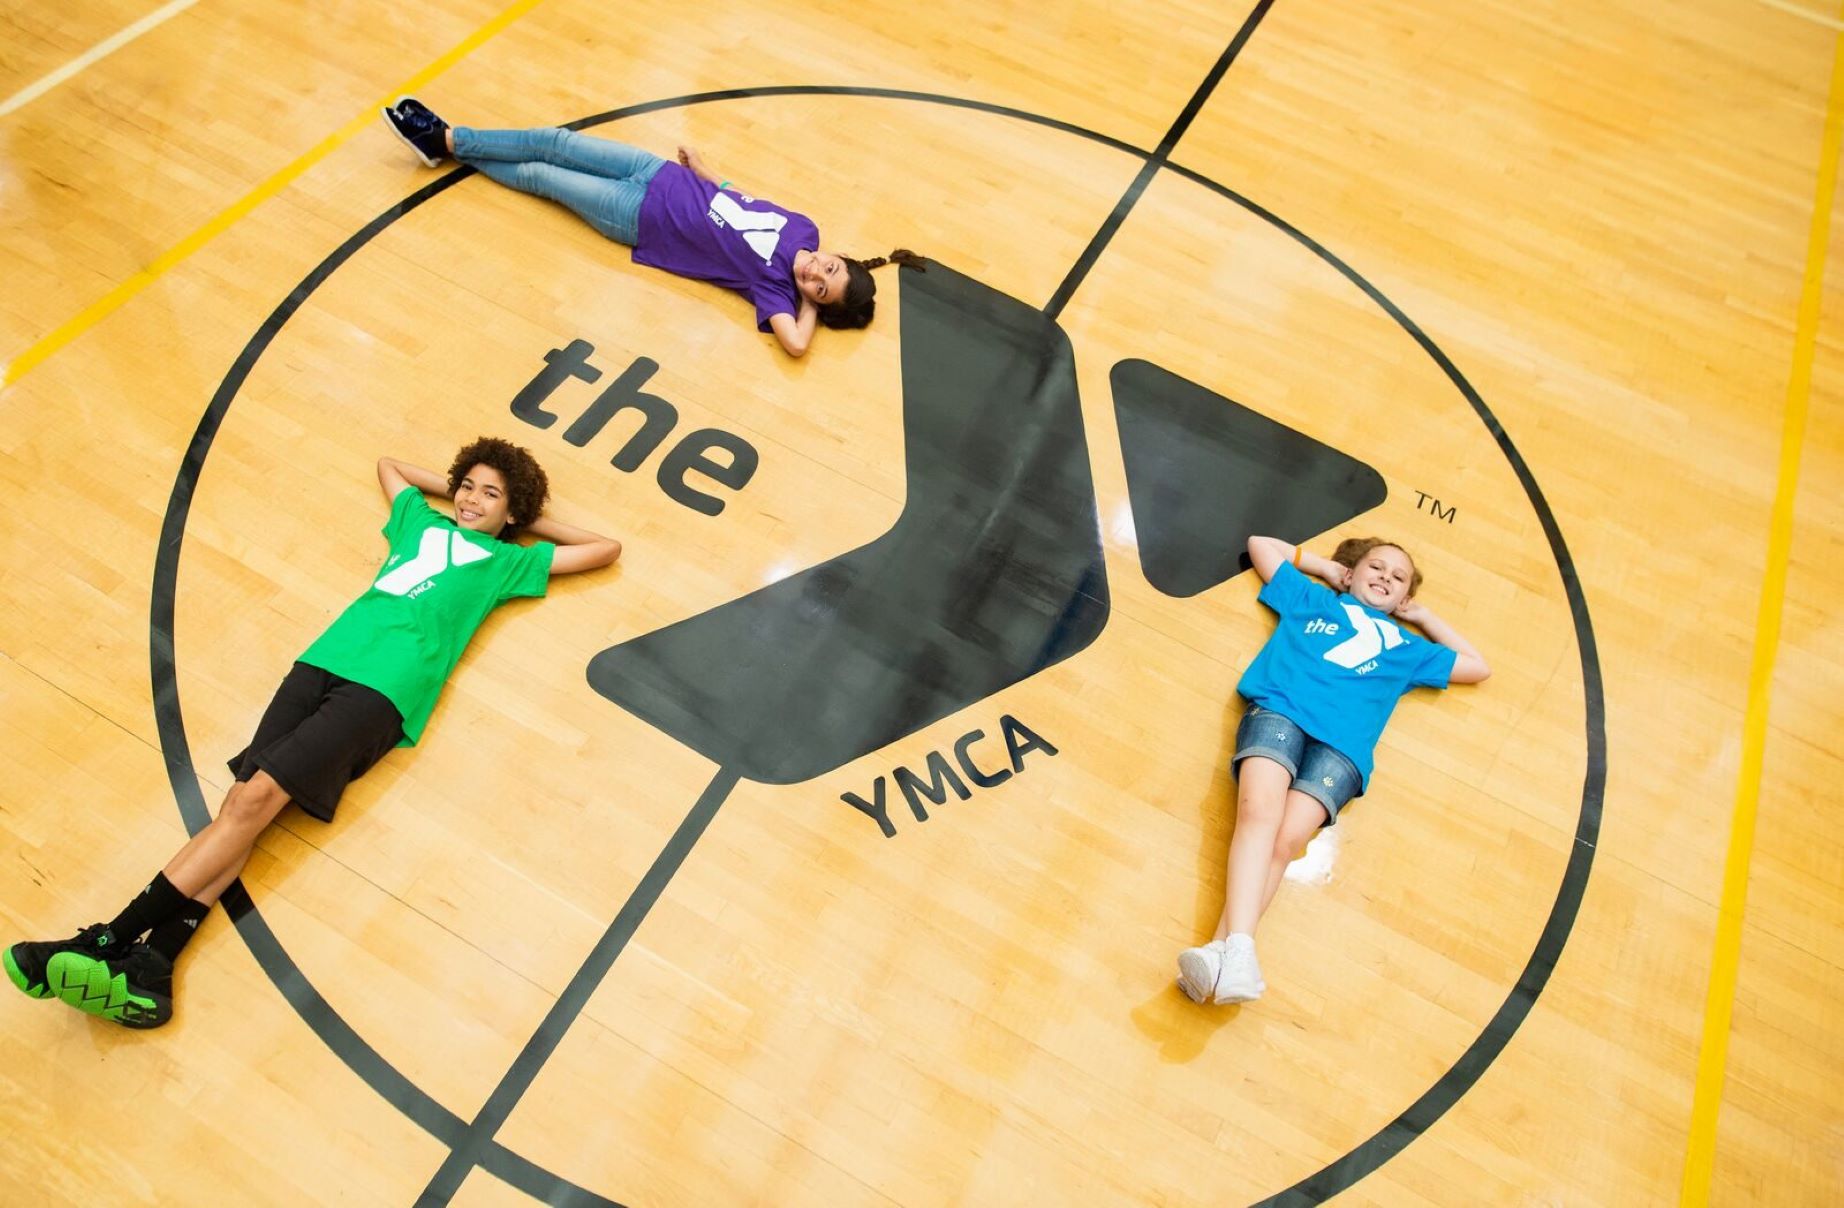 18 Ymca Facts - Facts.net